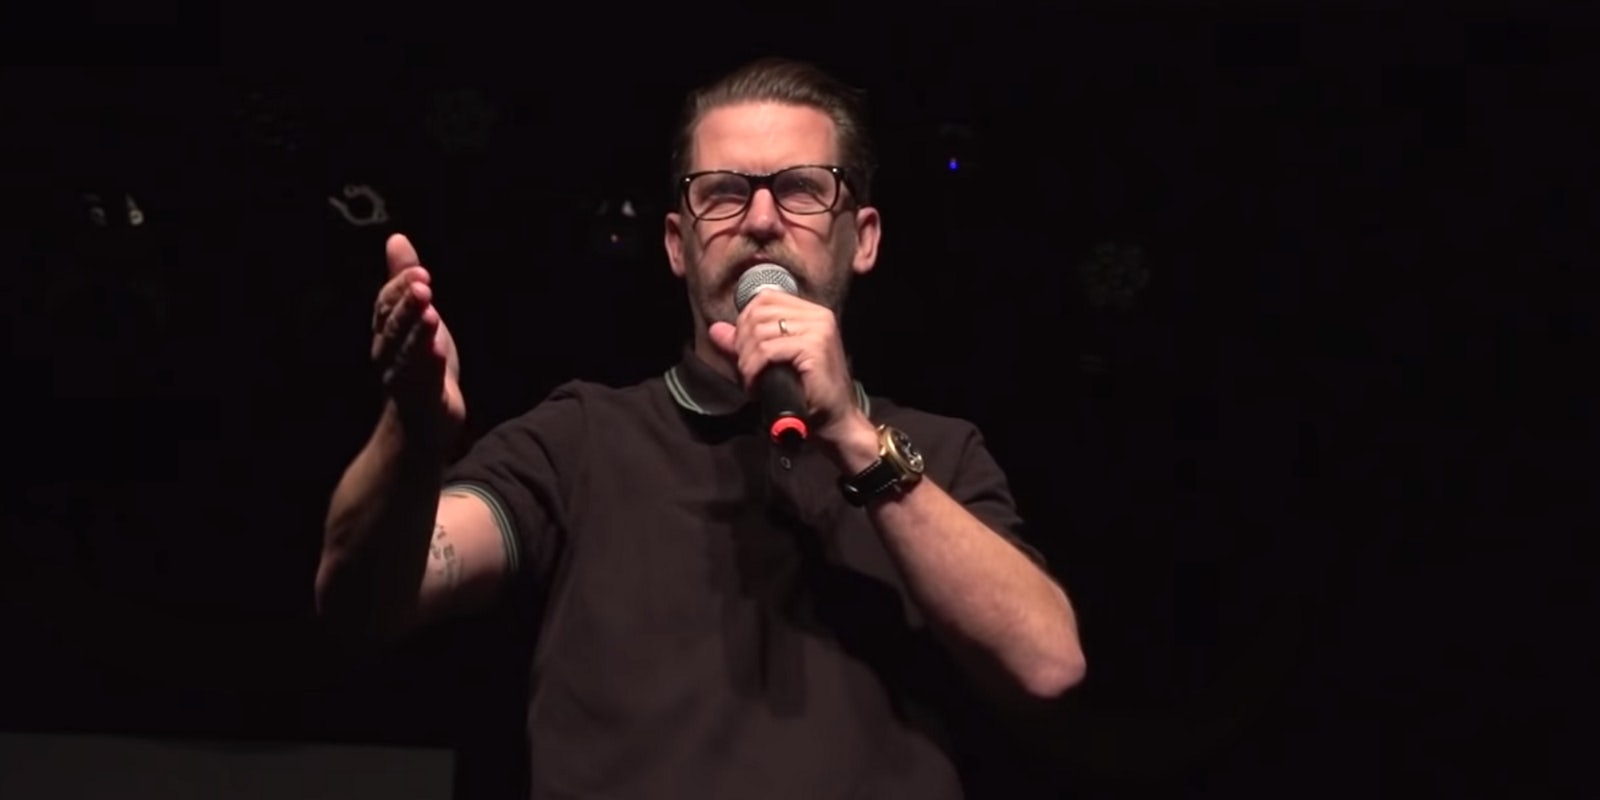 Proud Boys founder Gavin McInnes was banned from Facebook this week.